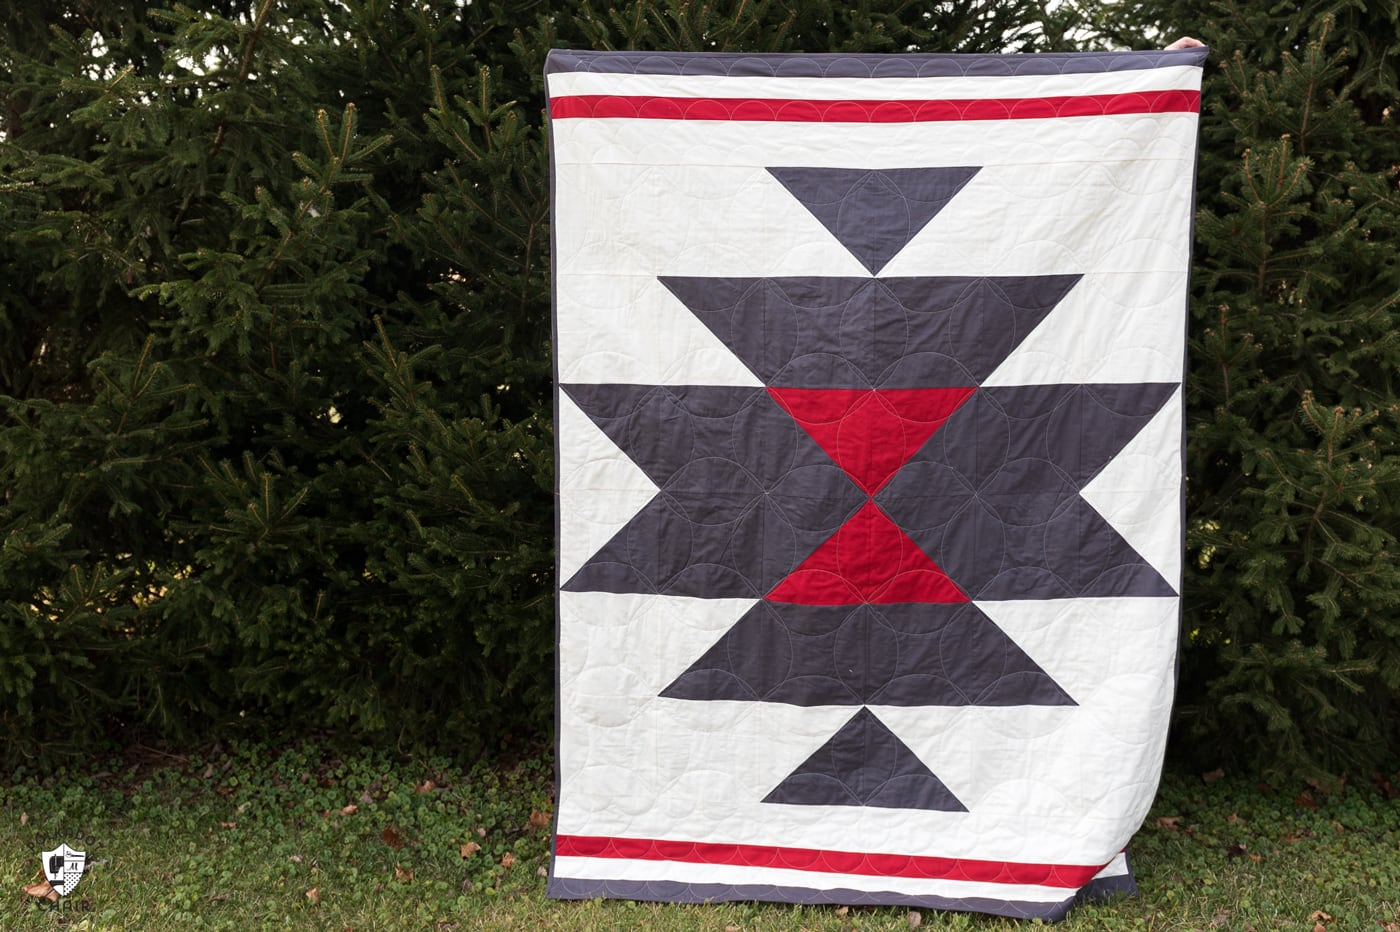 A free quilt pattern for a squash blossom quilt. A southwest style simple quilt pattern and free tutorial. #freequiltpattern #quilts #quilting #southweststyle #southwest #squashblossom